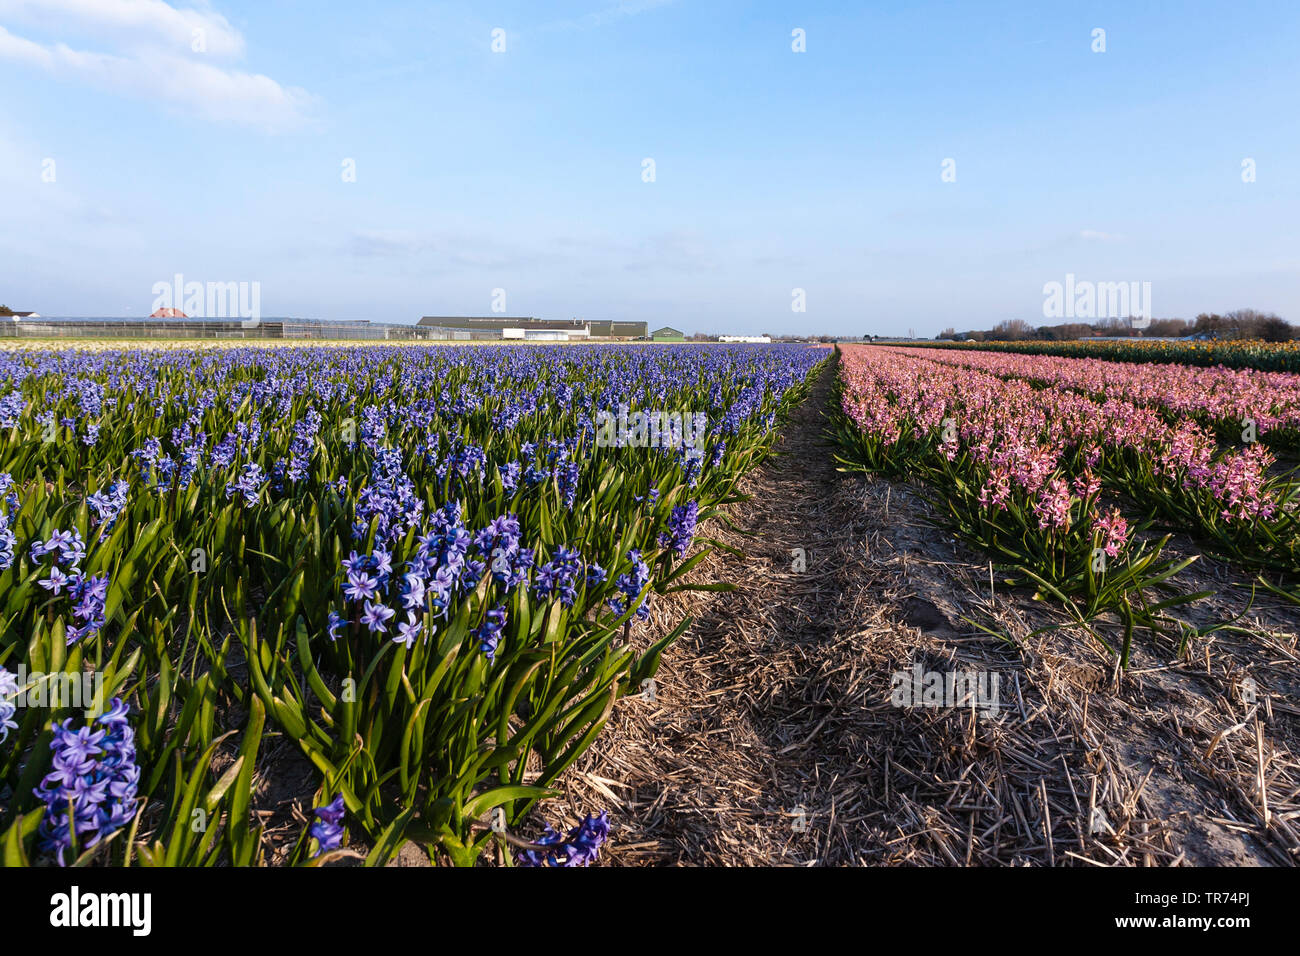 Jacinthe (Hyacinthus orientalis), Bulb Field with different colors of Hyacinths, Netherlands, Northern Netherlands Stock Photo